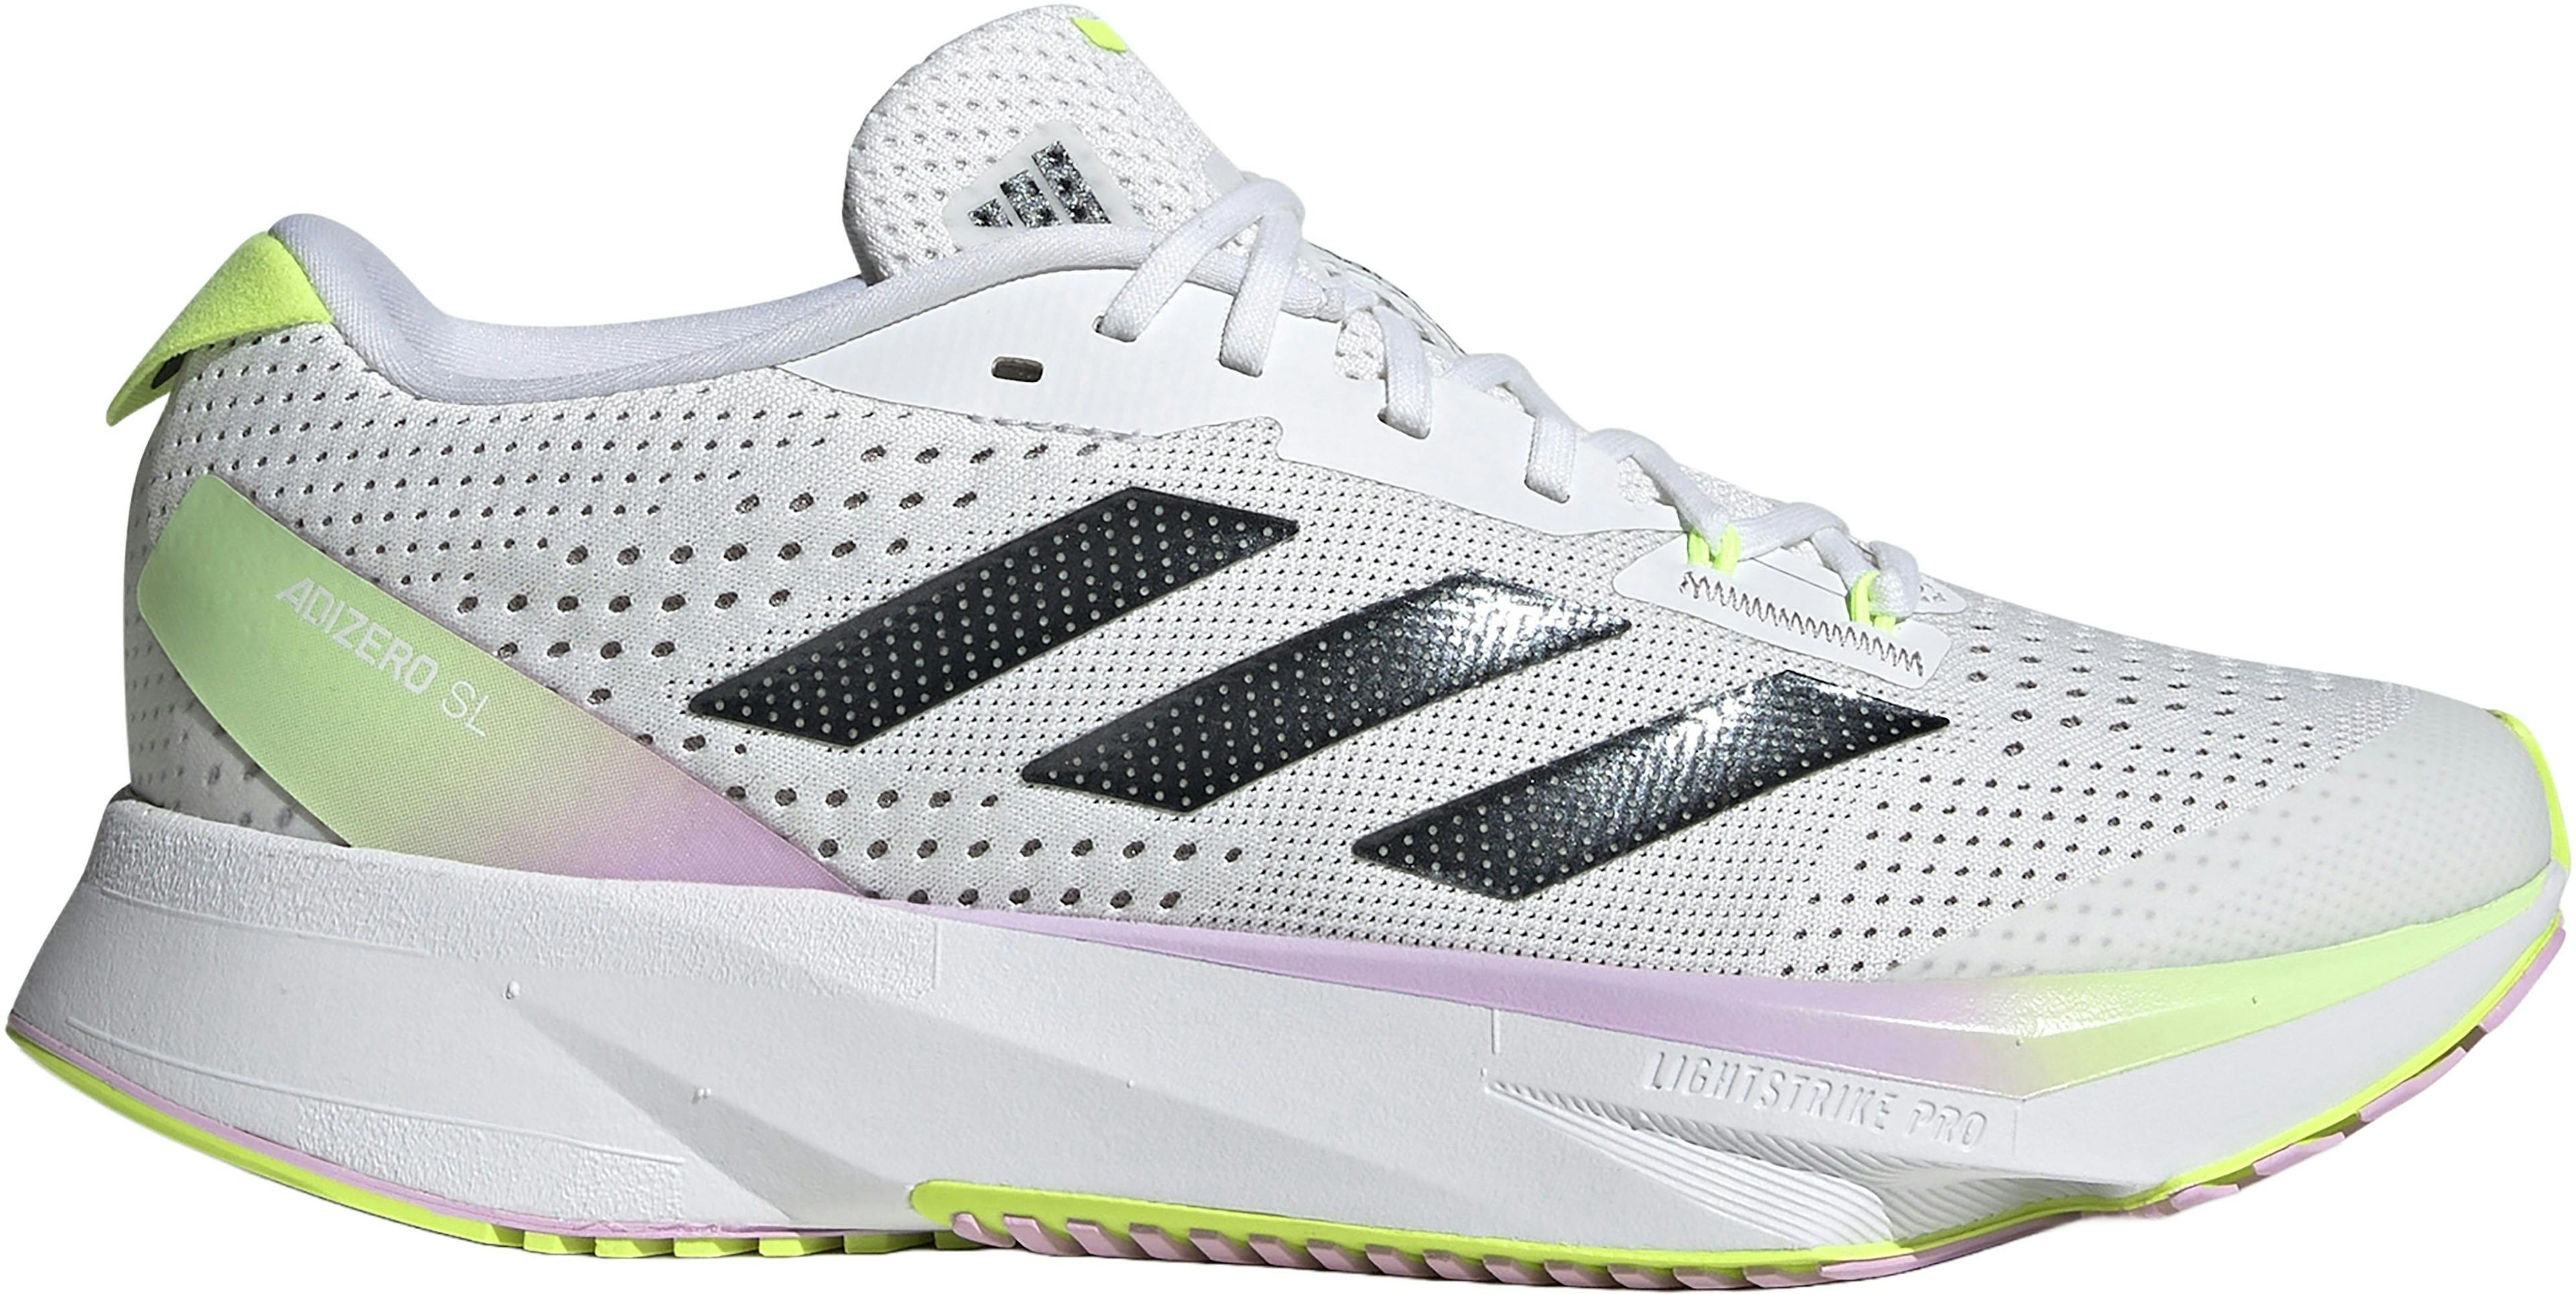 Product image for Adizero SL Running Shoes - Women's